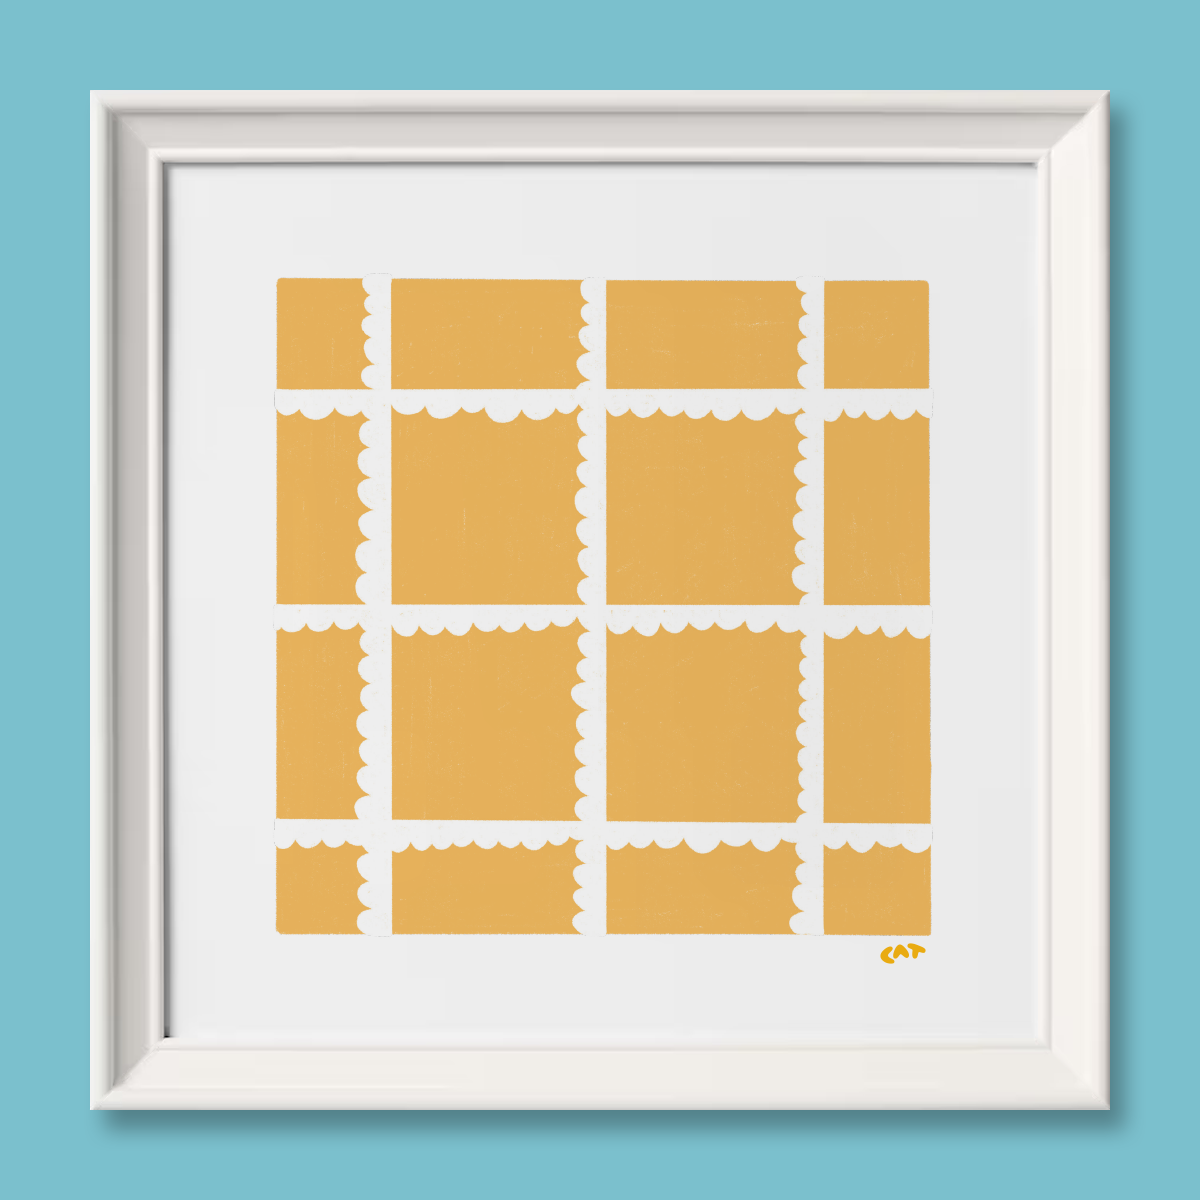 White framed print of a yellow square with white ruffles laid out in a grid composition.